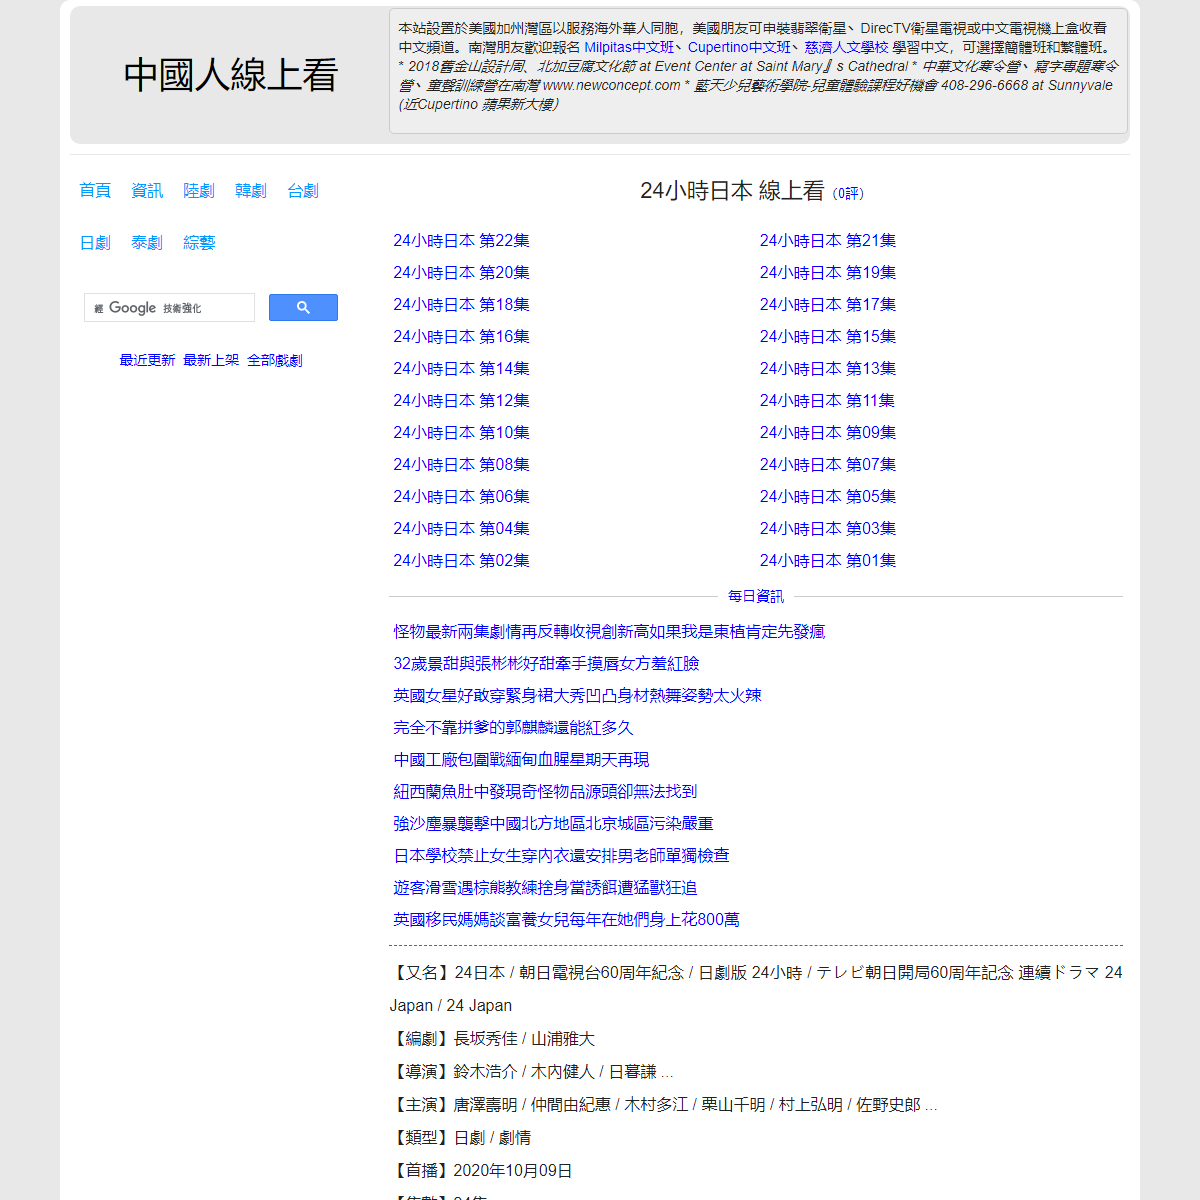 A complete backup of https://chinaq.at/jp201009/